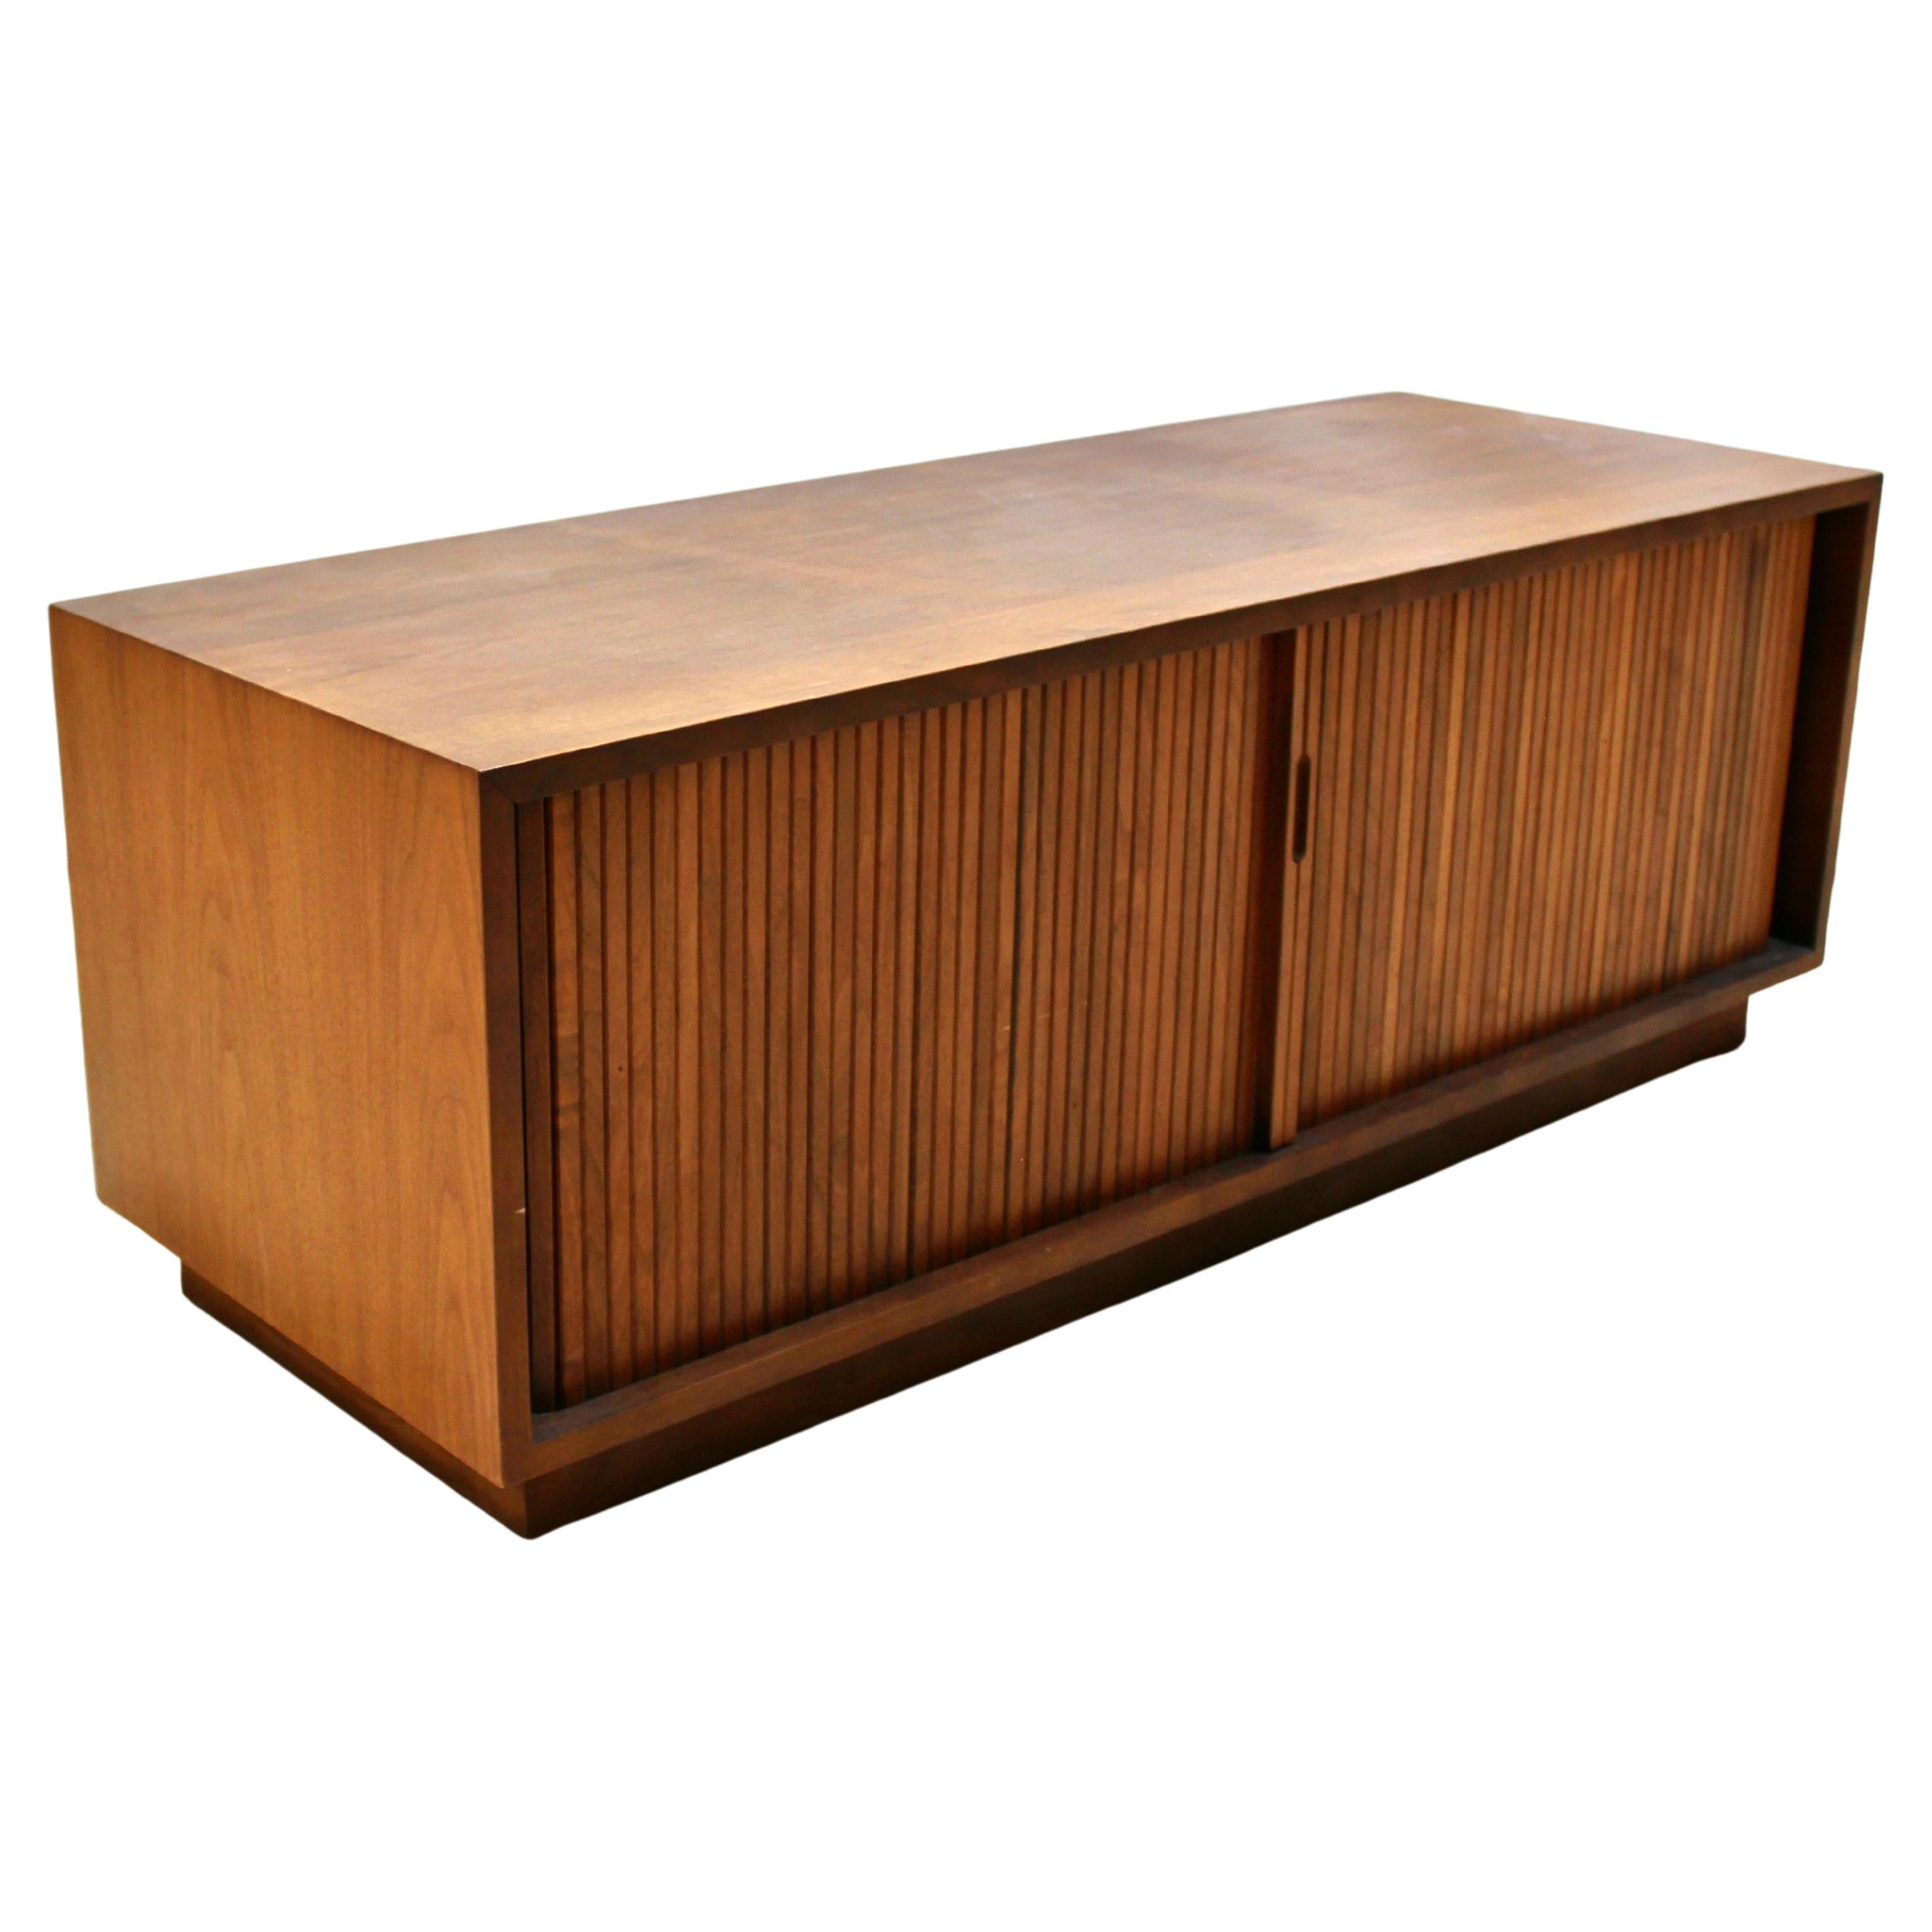 Mid-Century Barzilay Record Cabinet with Tambour Doors